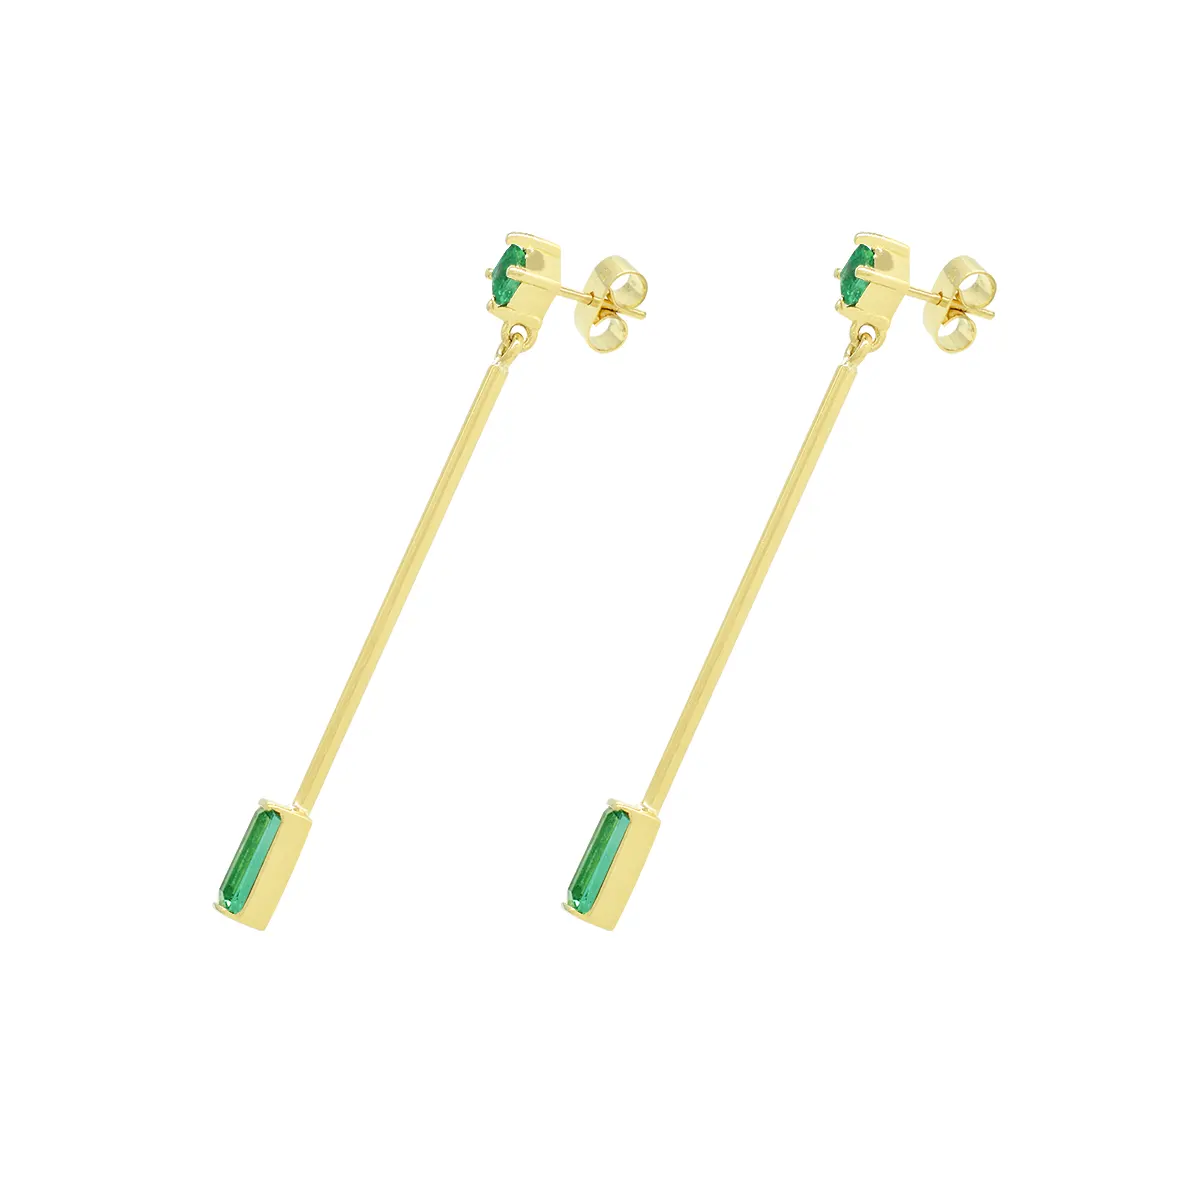 The entire set of earrings is custom-made in solid 18K yellow gold. They have durable butterfly pushbacks handcrafted especially for this set of earrings